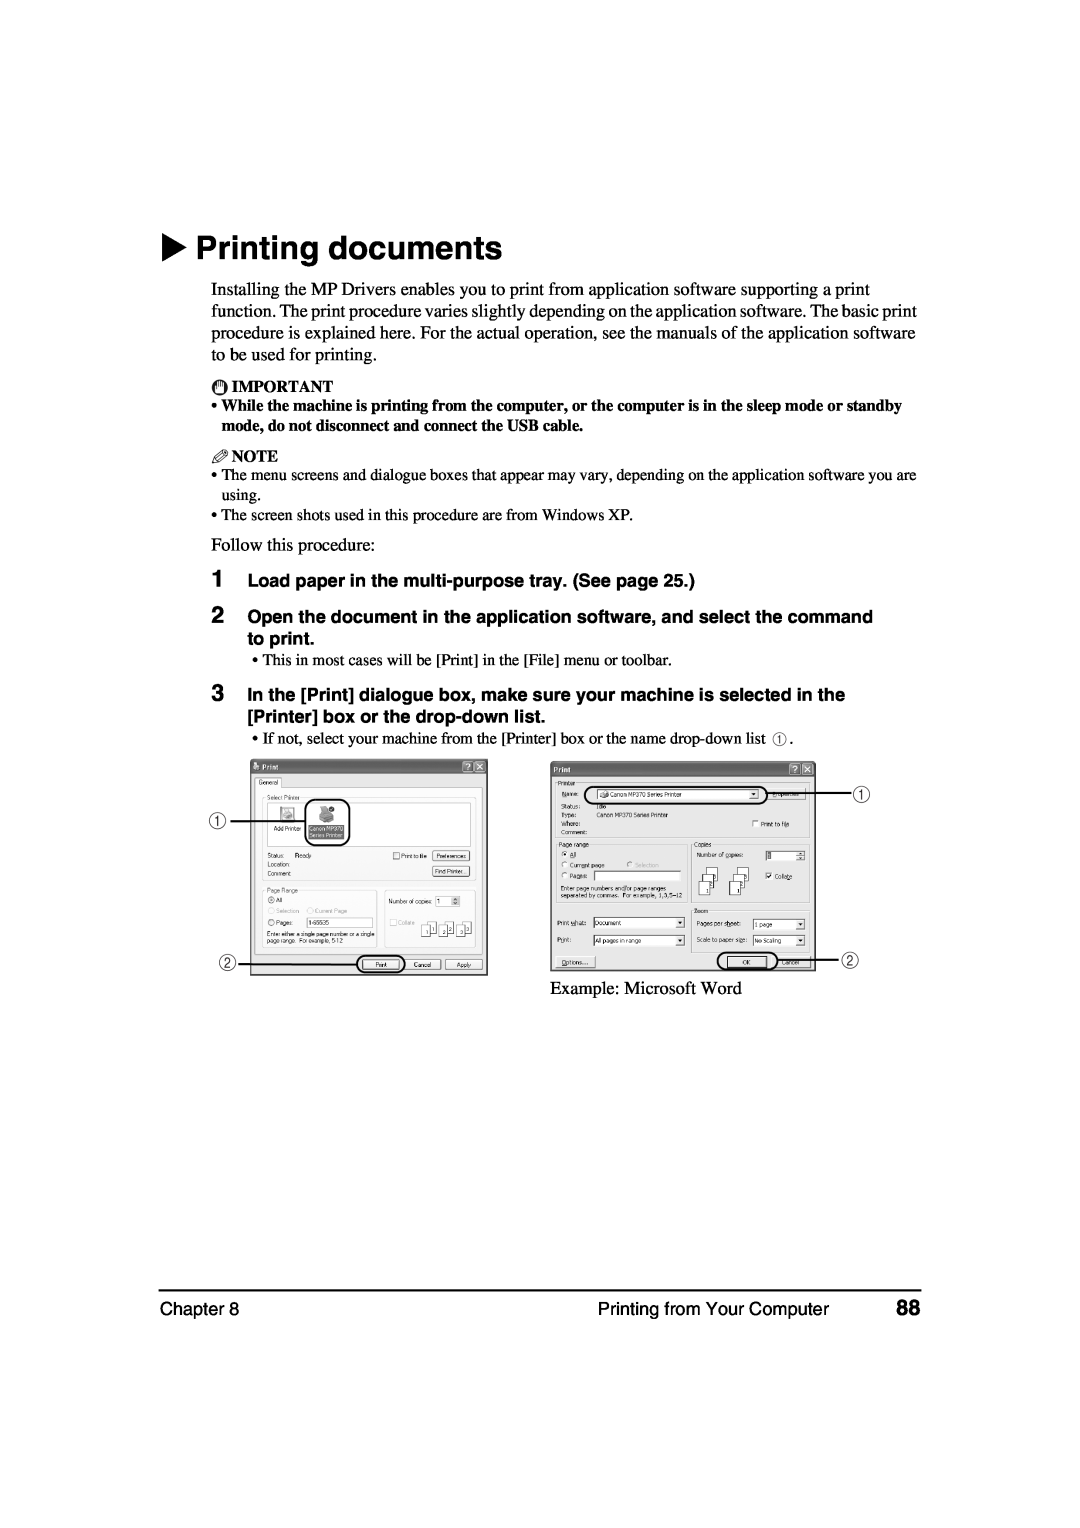 Canon MP360, MP370 manual Printing documents, Load paper in the multi-purpose tray. See page 